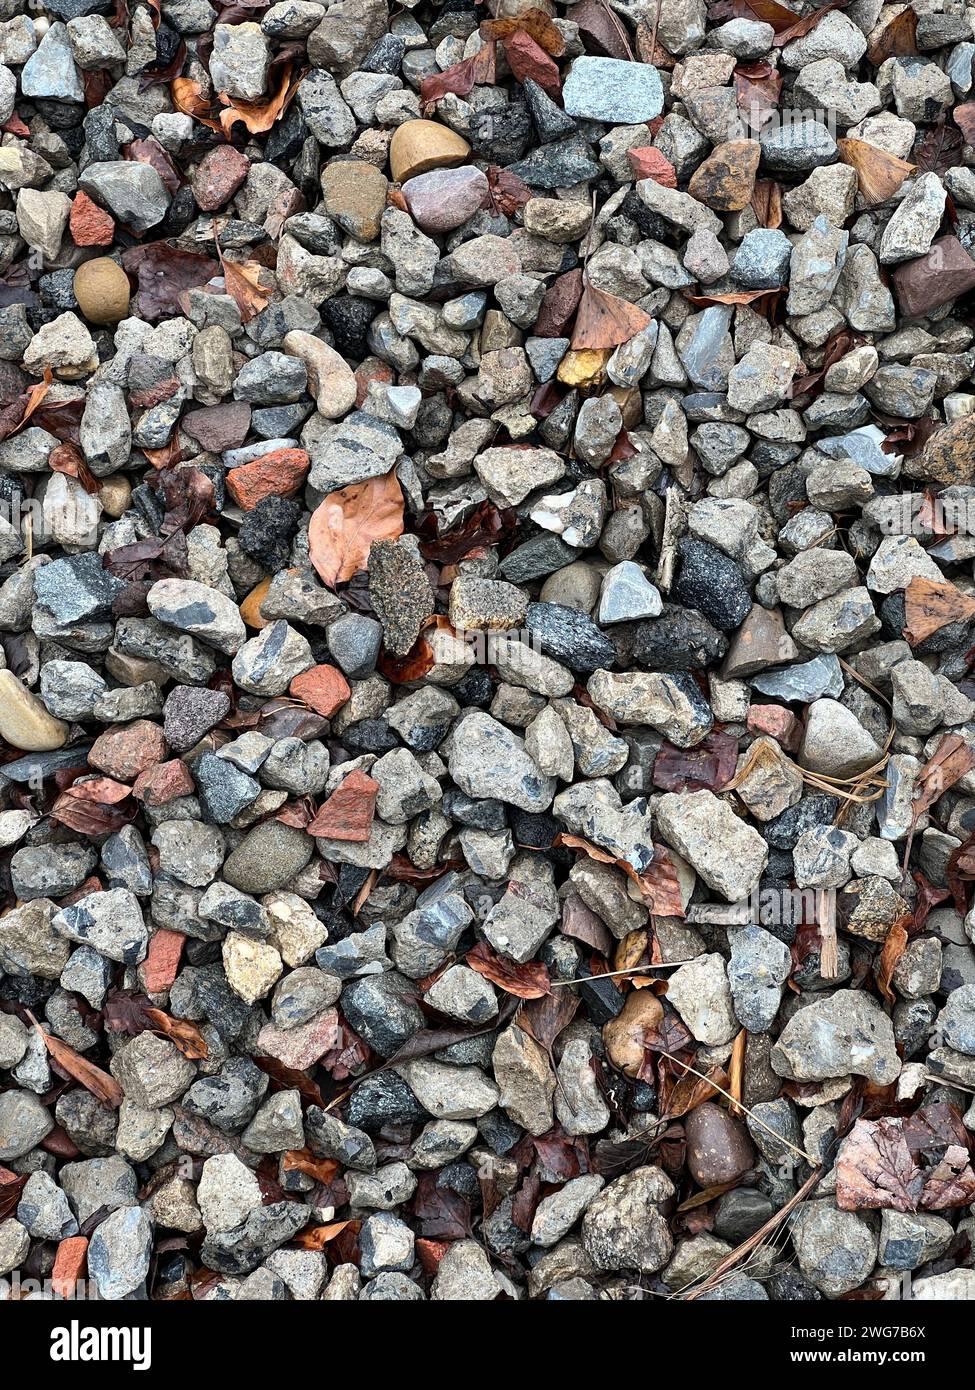 Bed of small stones in Prospect Park, Brooklyn, New York. Stock Photo